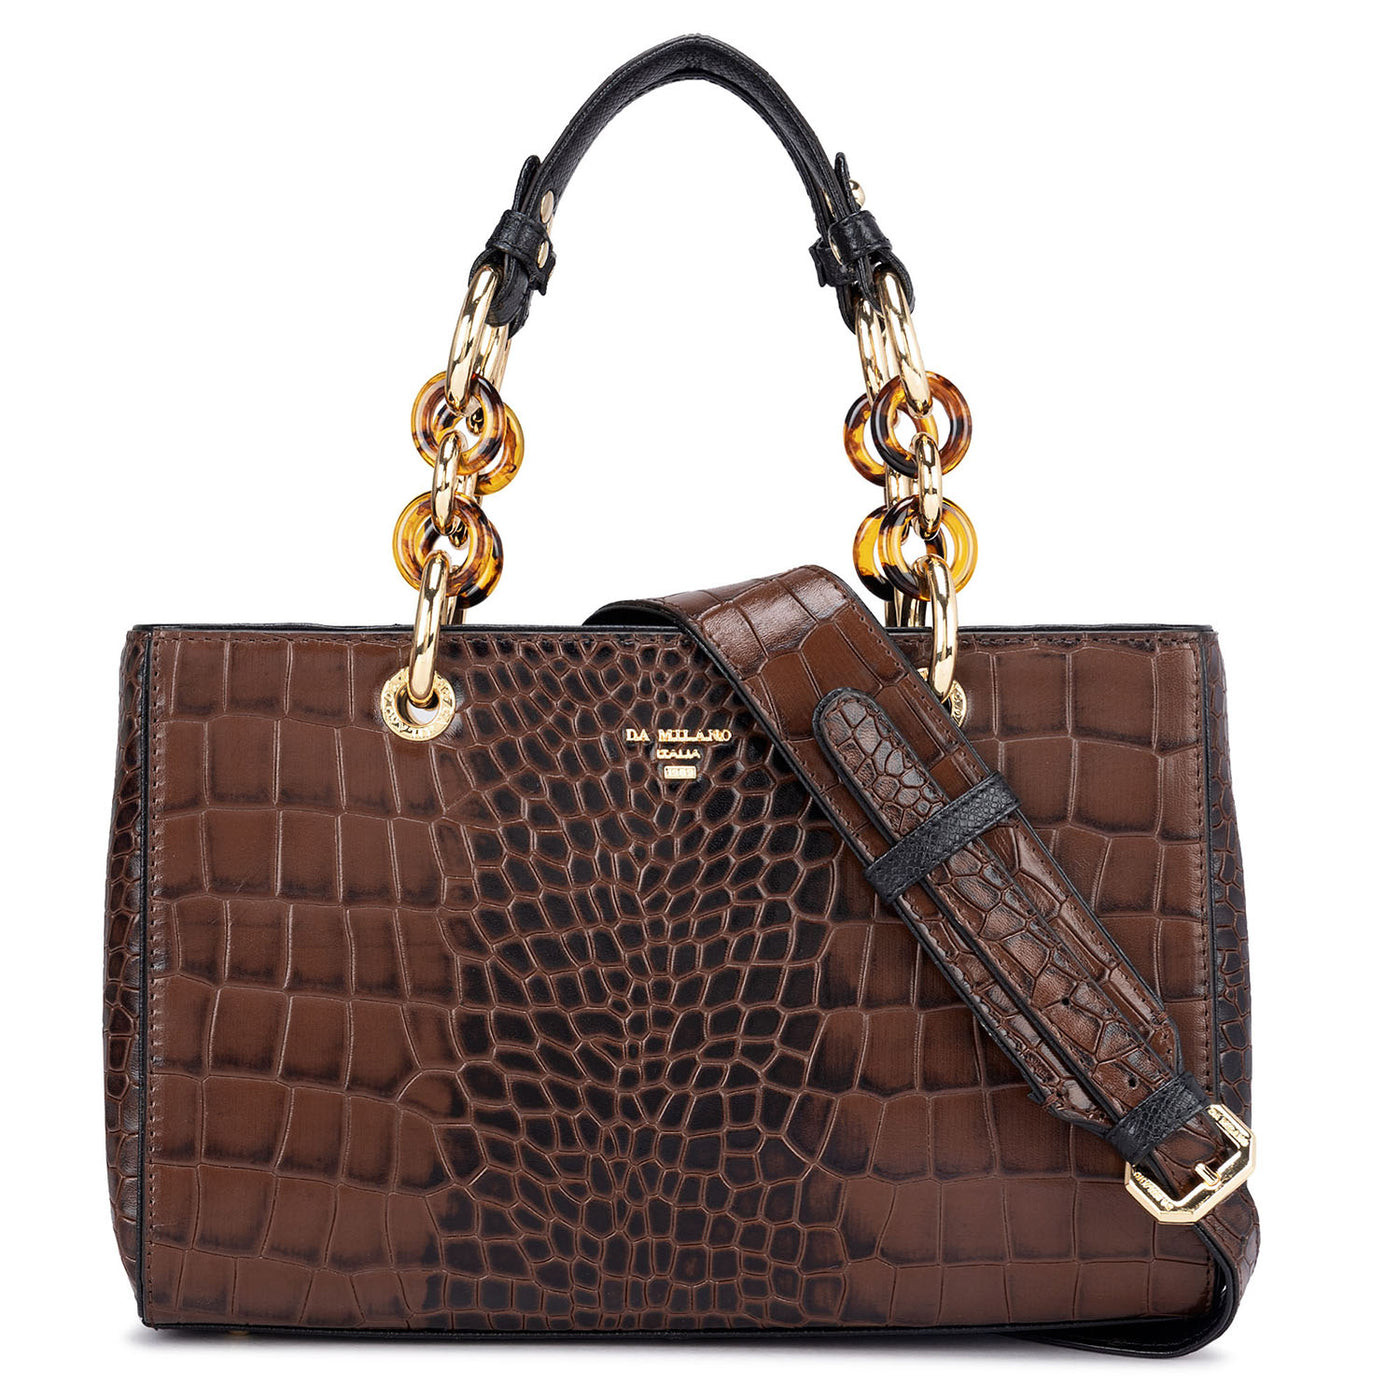 Small Croco Leather Satchel - Brown